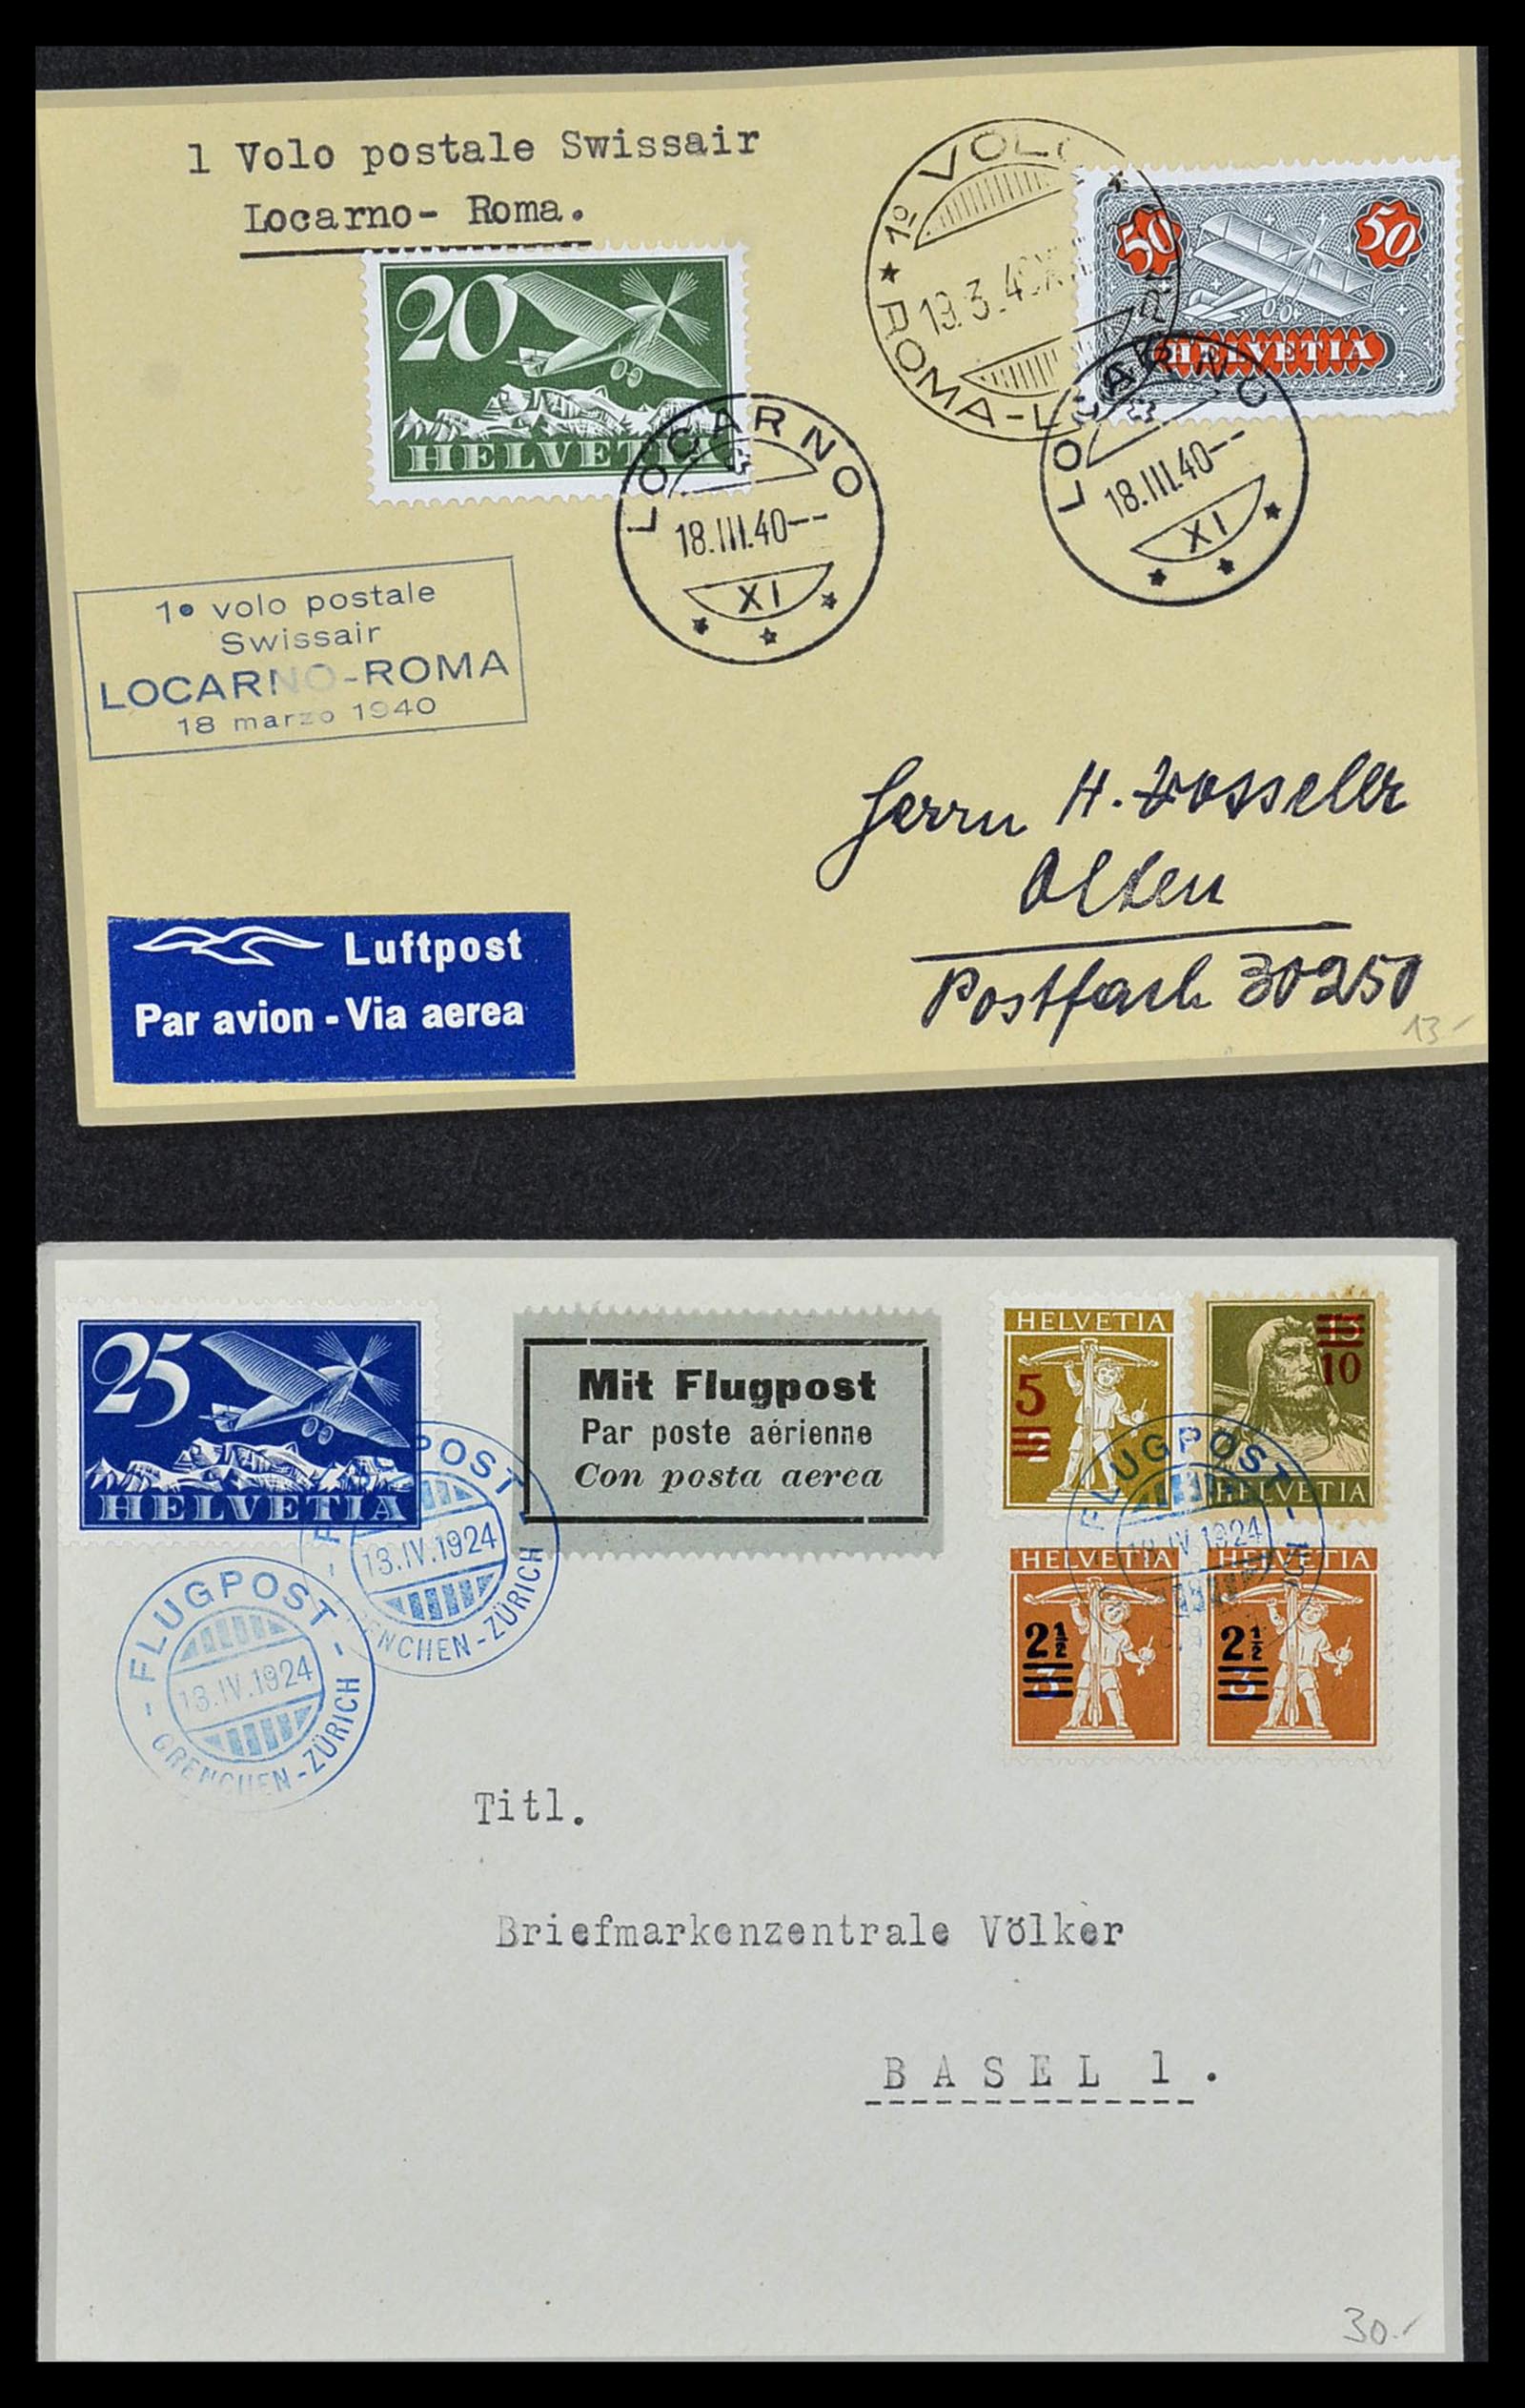 34141 035 - Stamp collection 34141 Switzerland airmail covers 1920-1960.